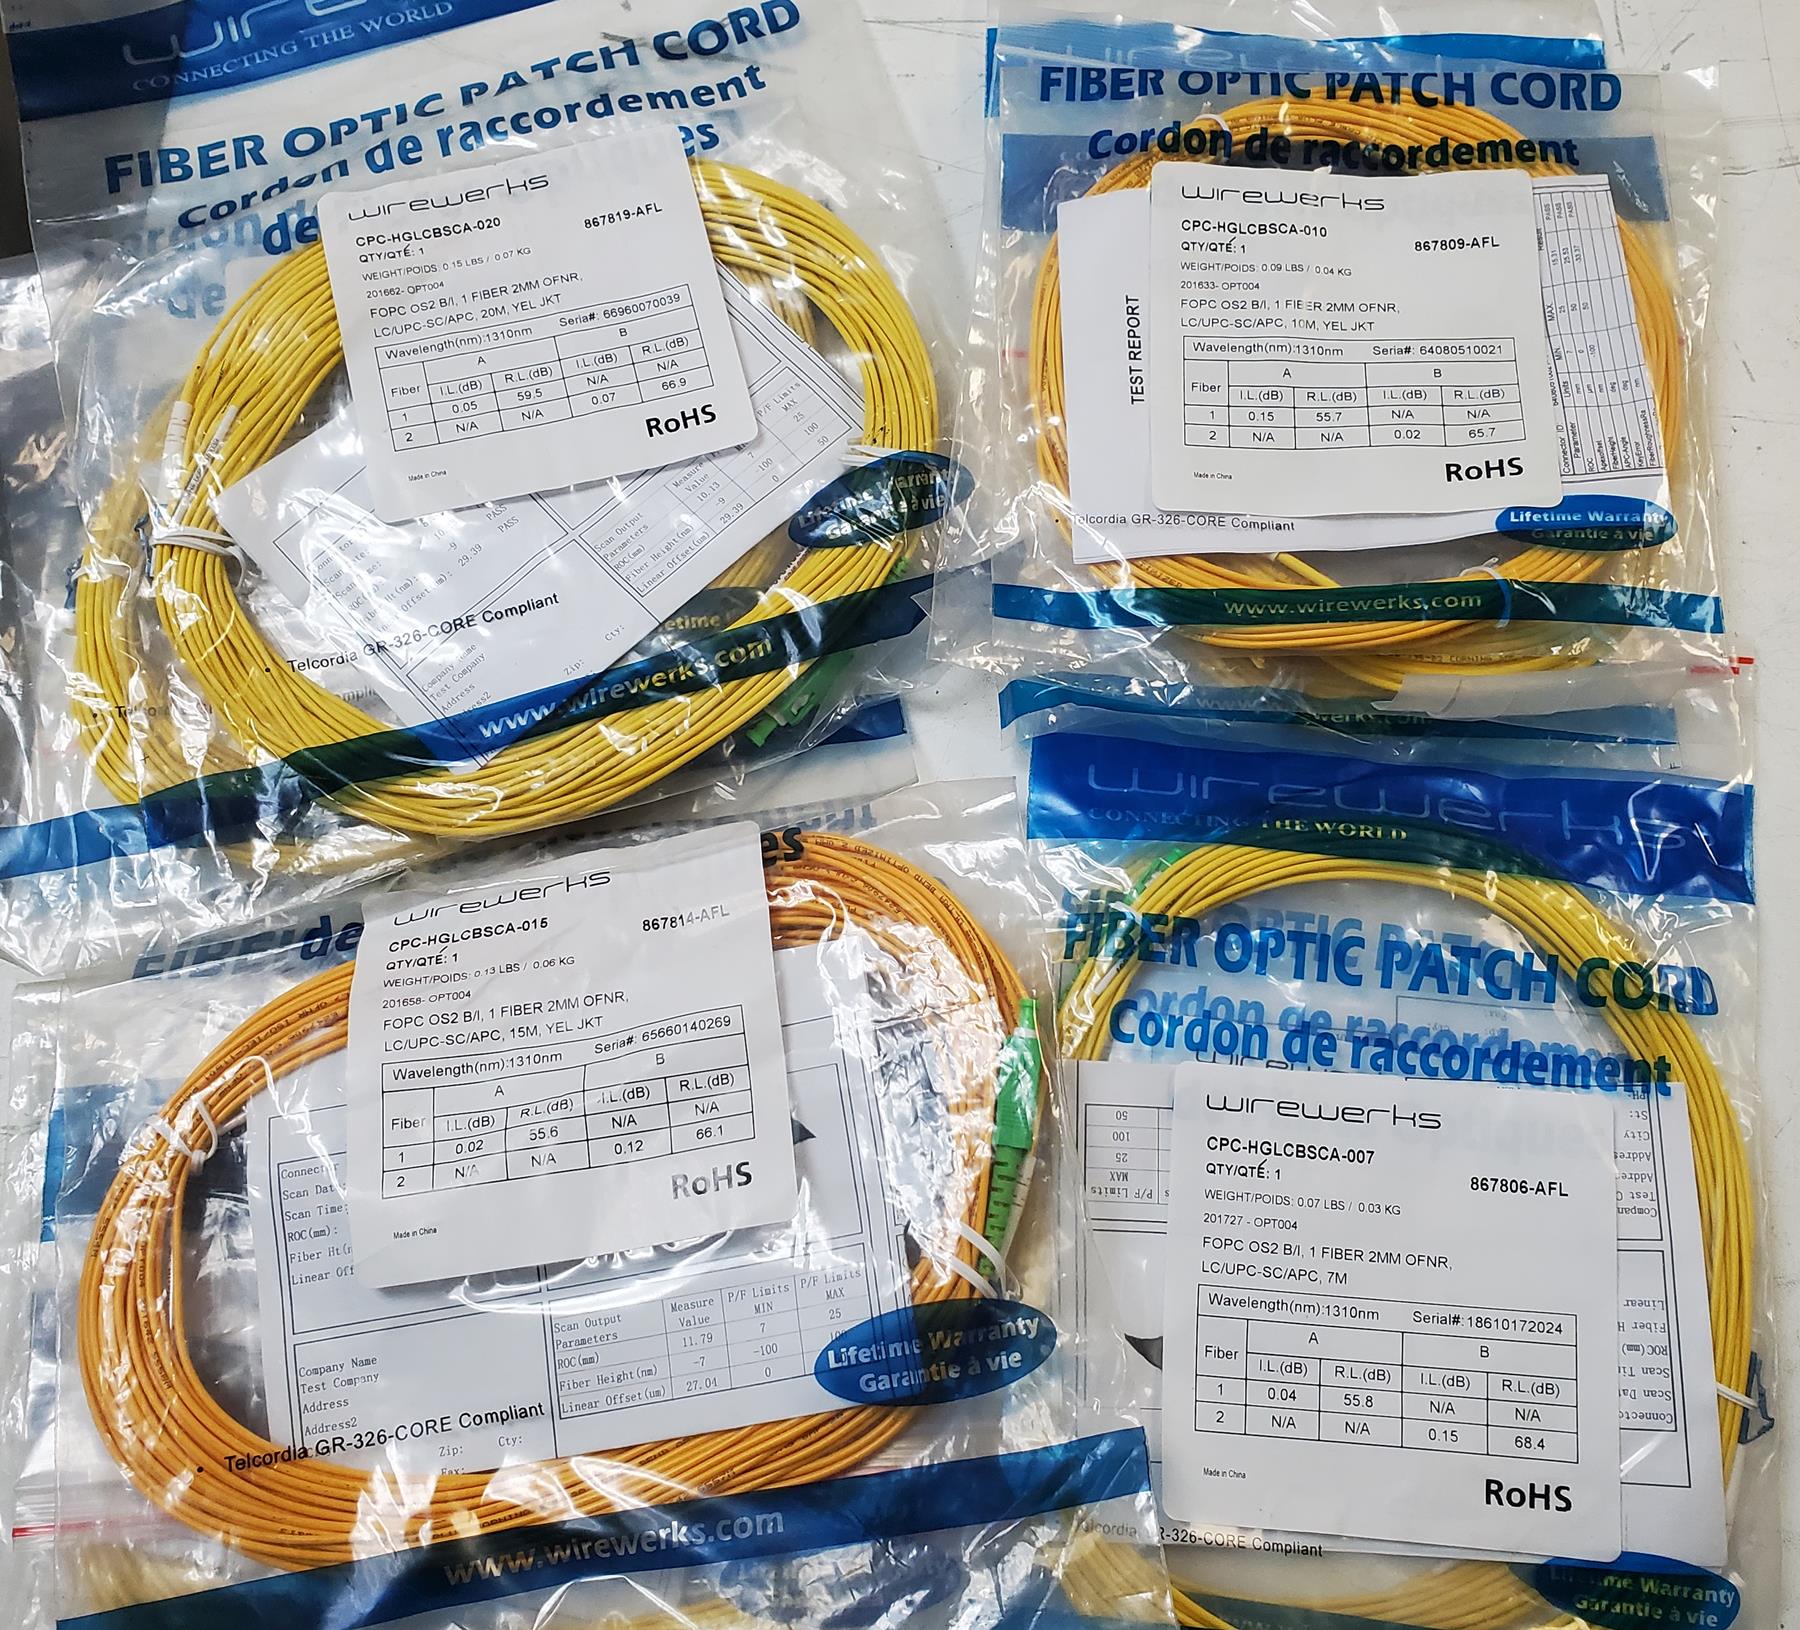 AccuSource LC SC patchcord Mixed lot just arrived